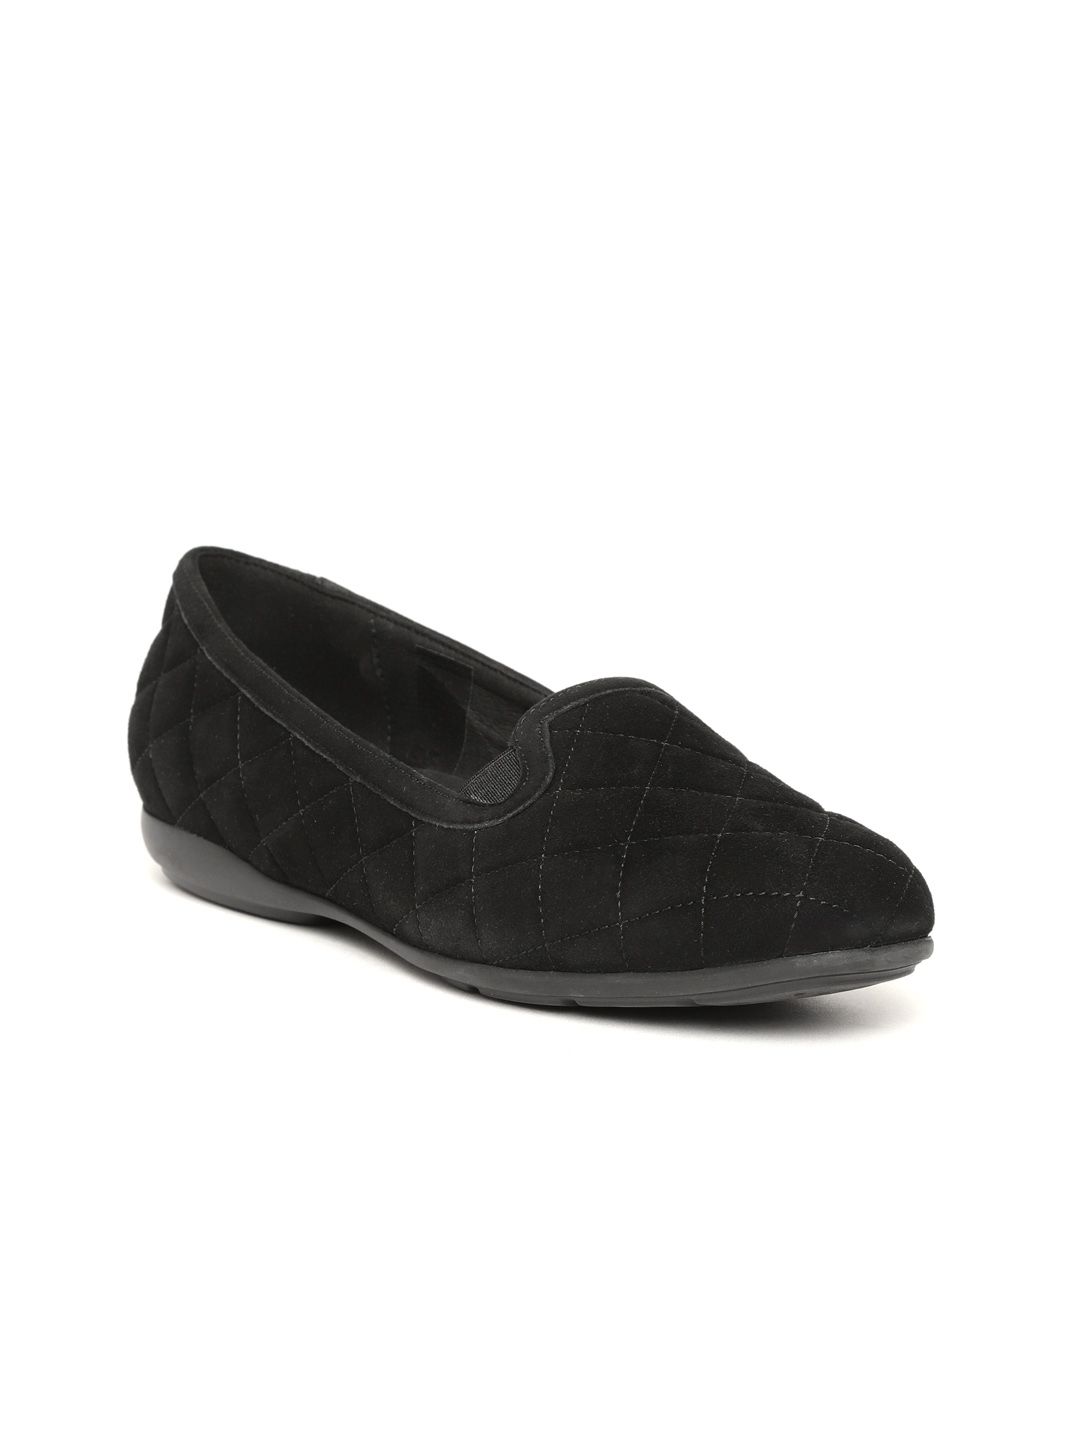 Geox Women Black Suede Leather Quilted Slip-On Sneakers Price in India